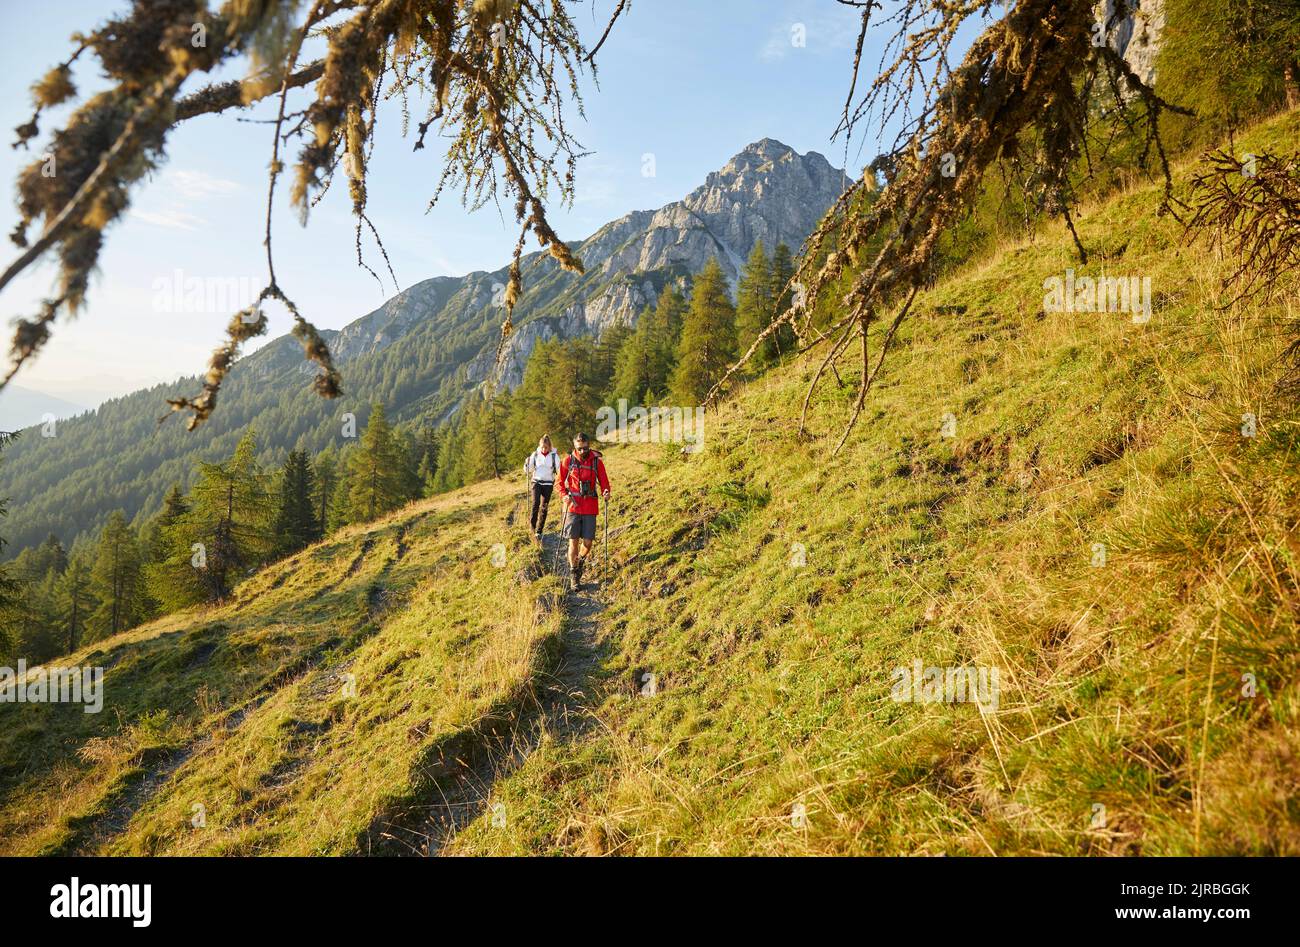 Friends walking on trail at mountain, Mutters, Tyrol, Austria Stock Photo